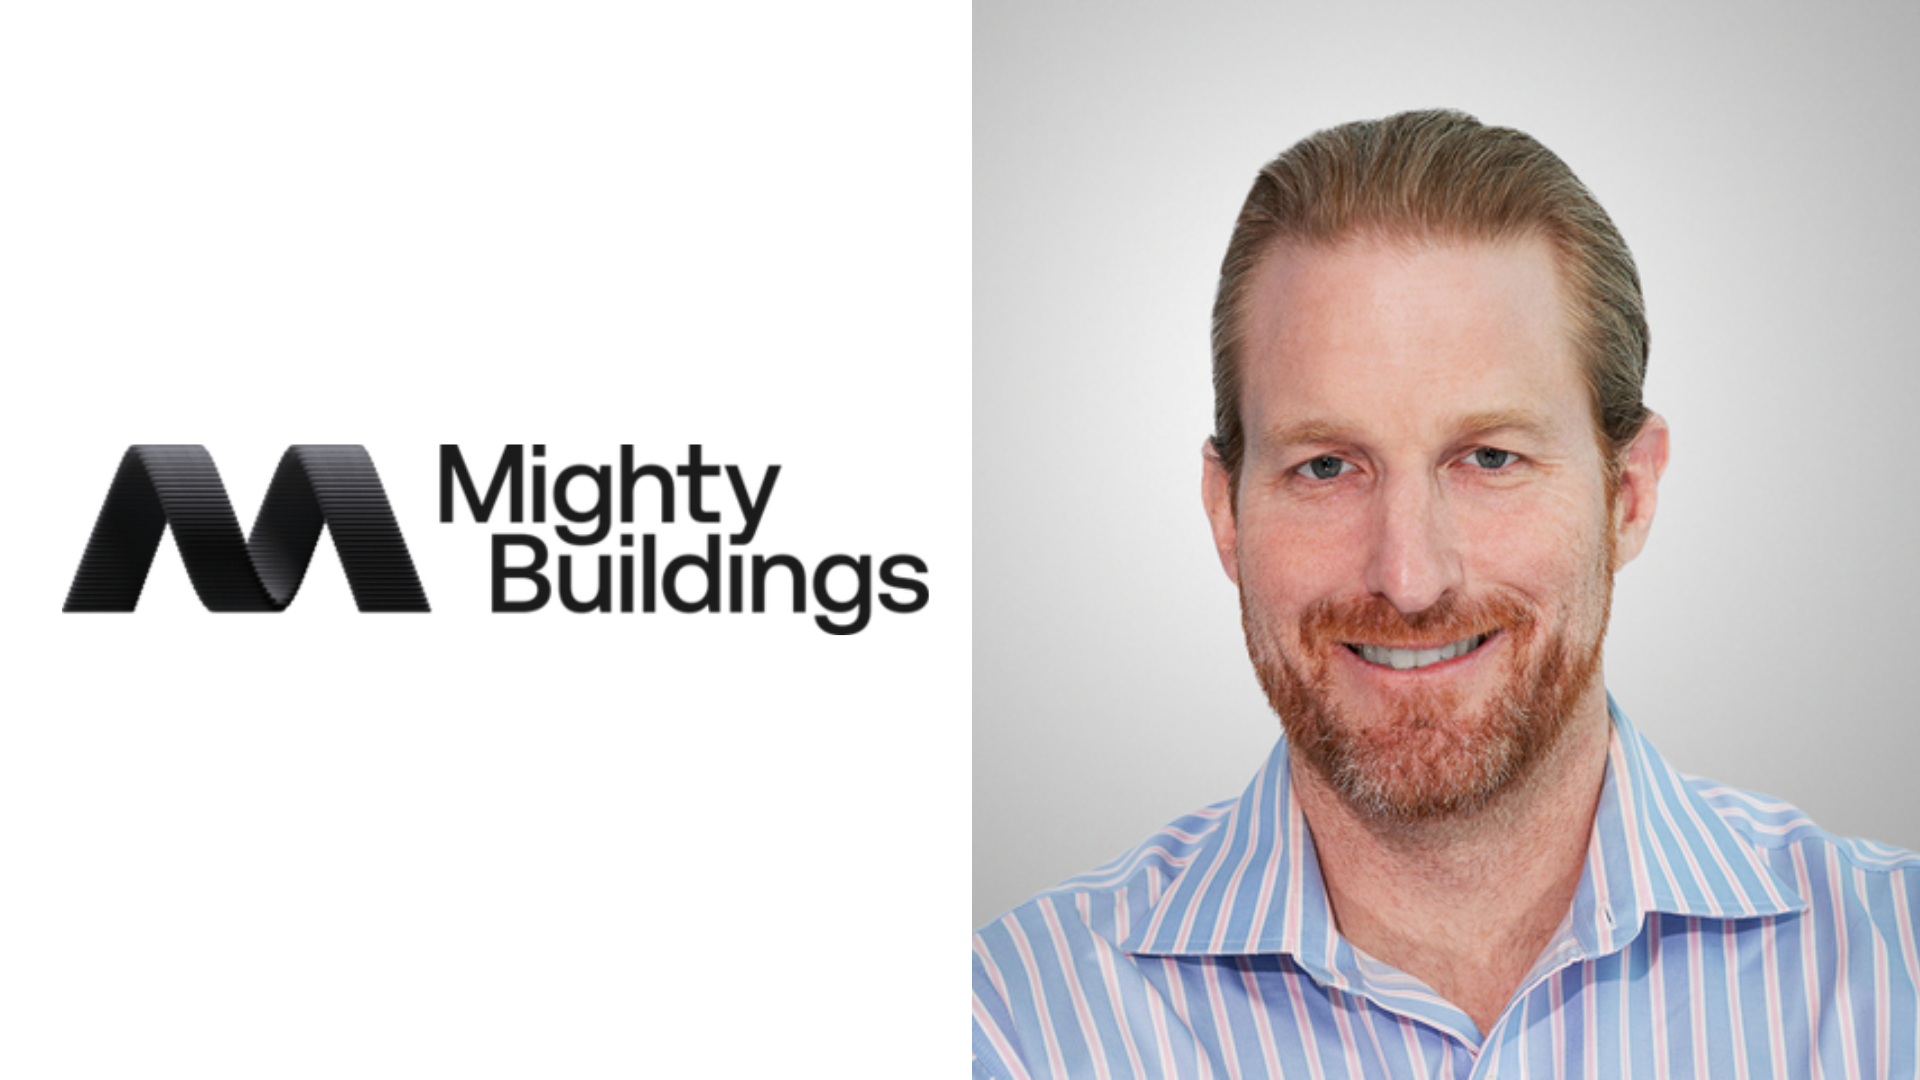 As Mighty Buildings advances 3D printing construction, Scott Gebicke joins the company with a strong track record of manufacturing innovation